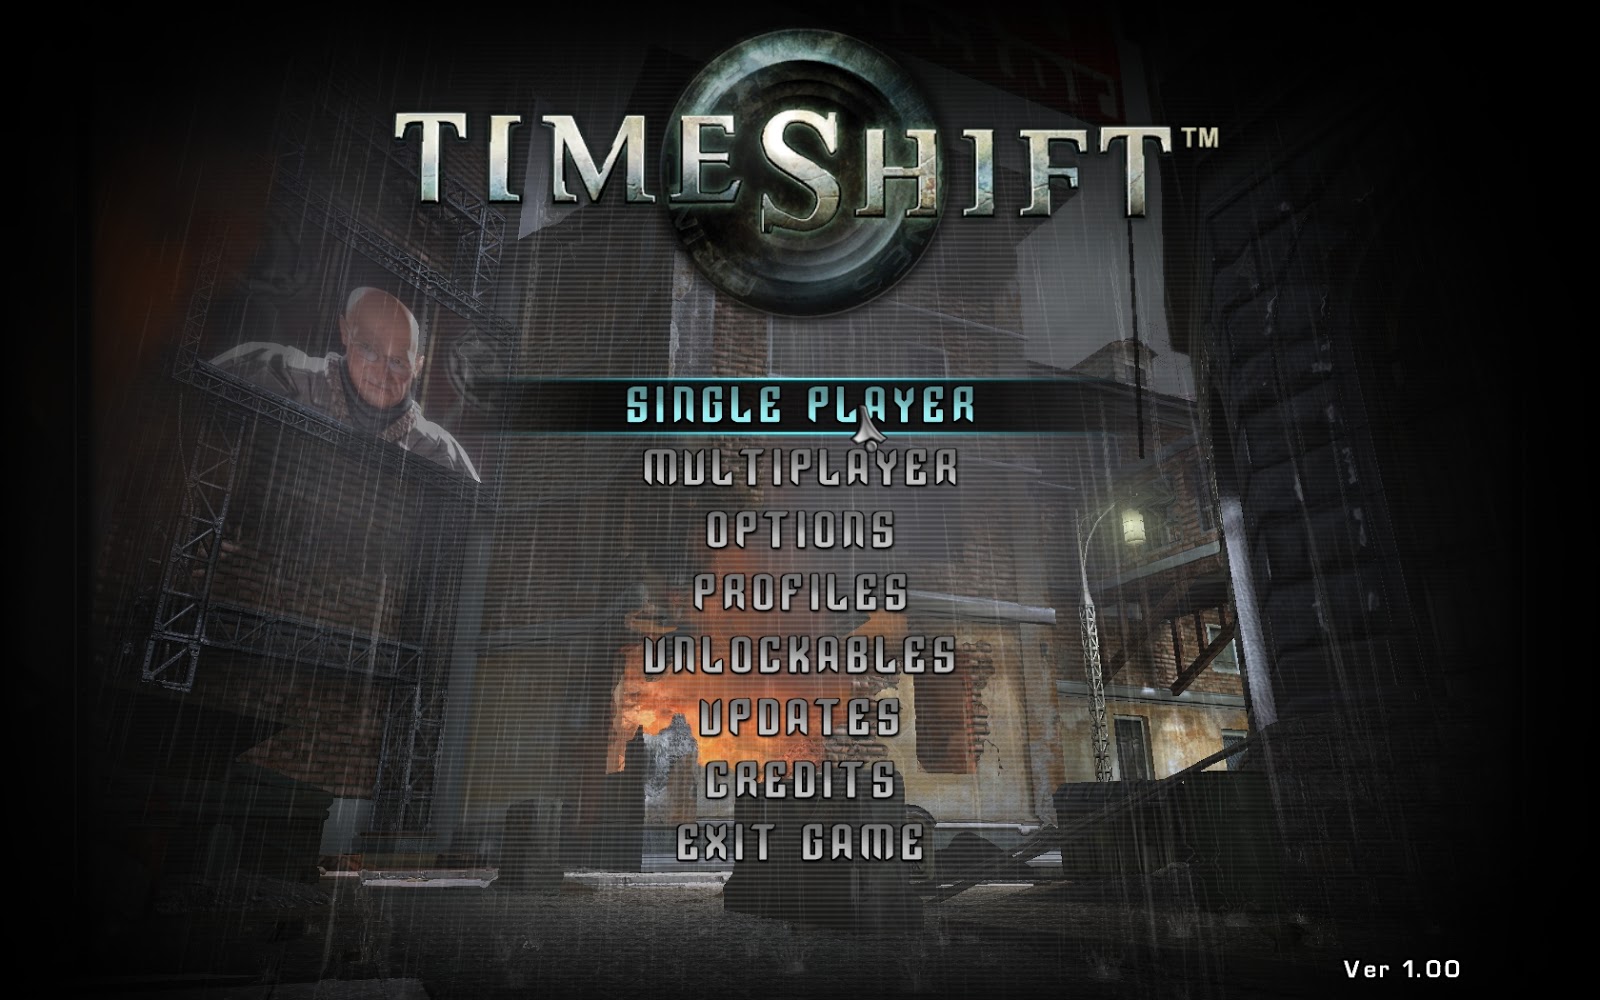 Time Shift PC Game Free Download